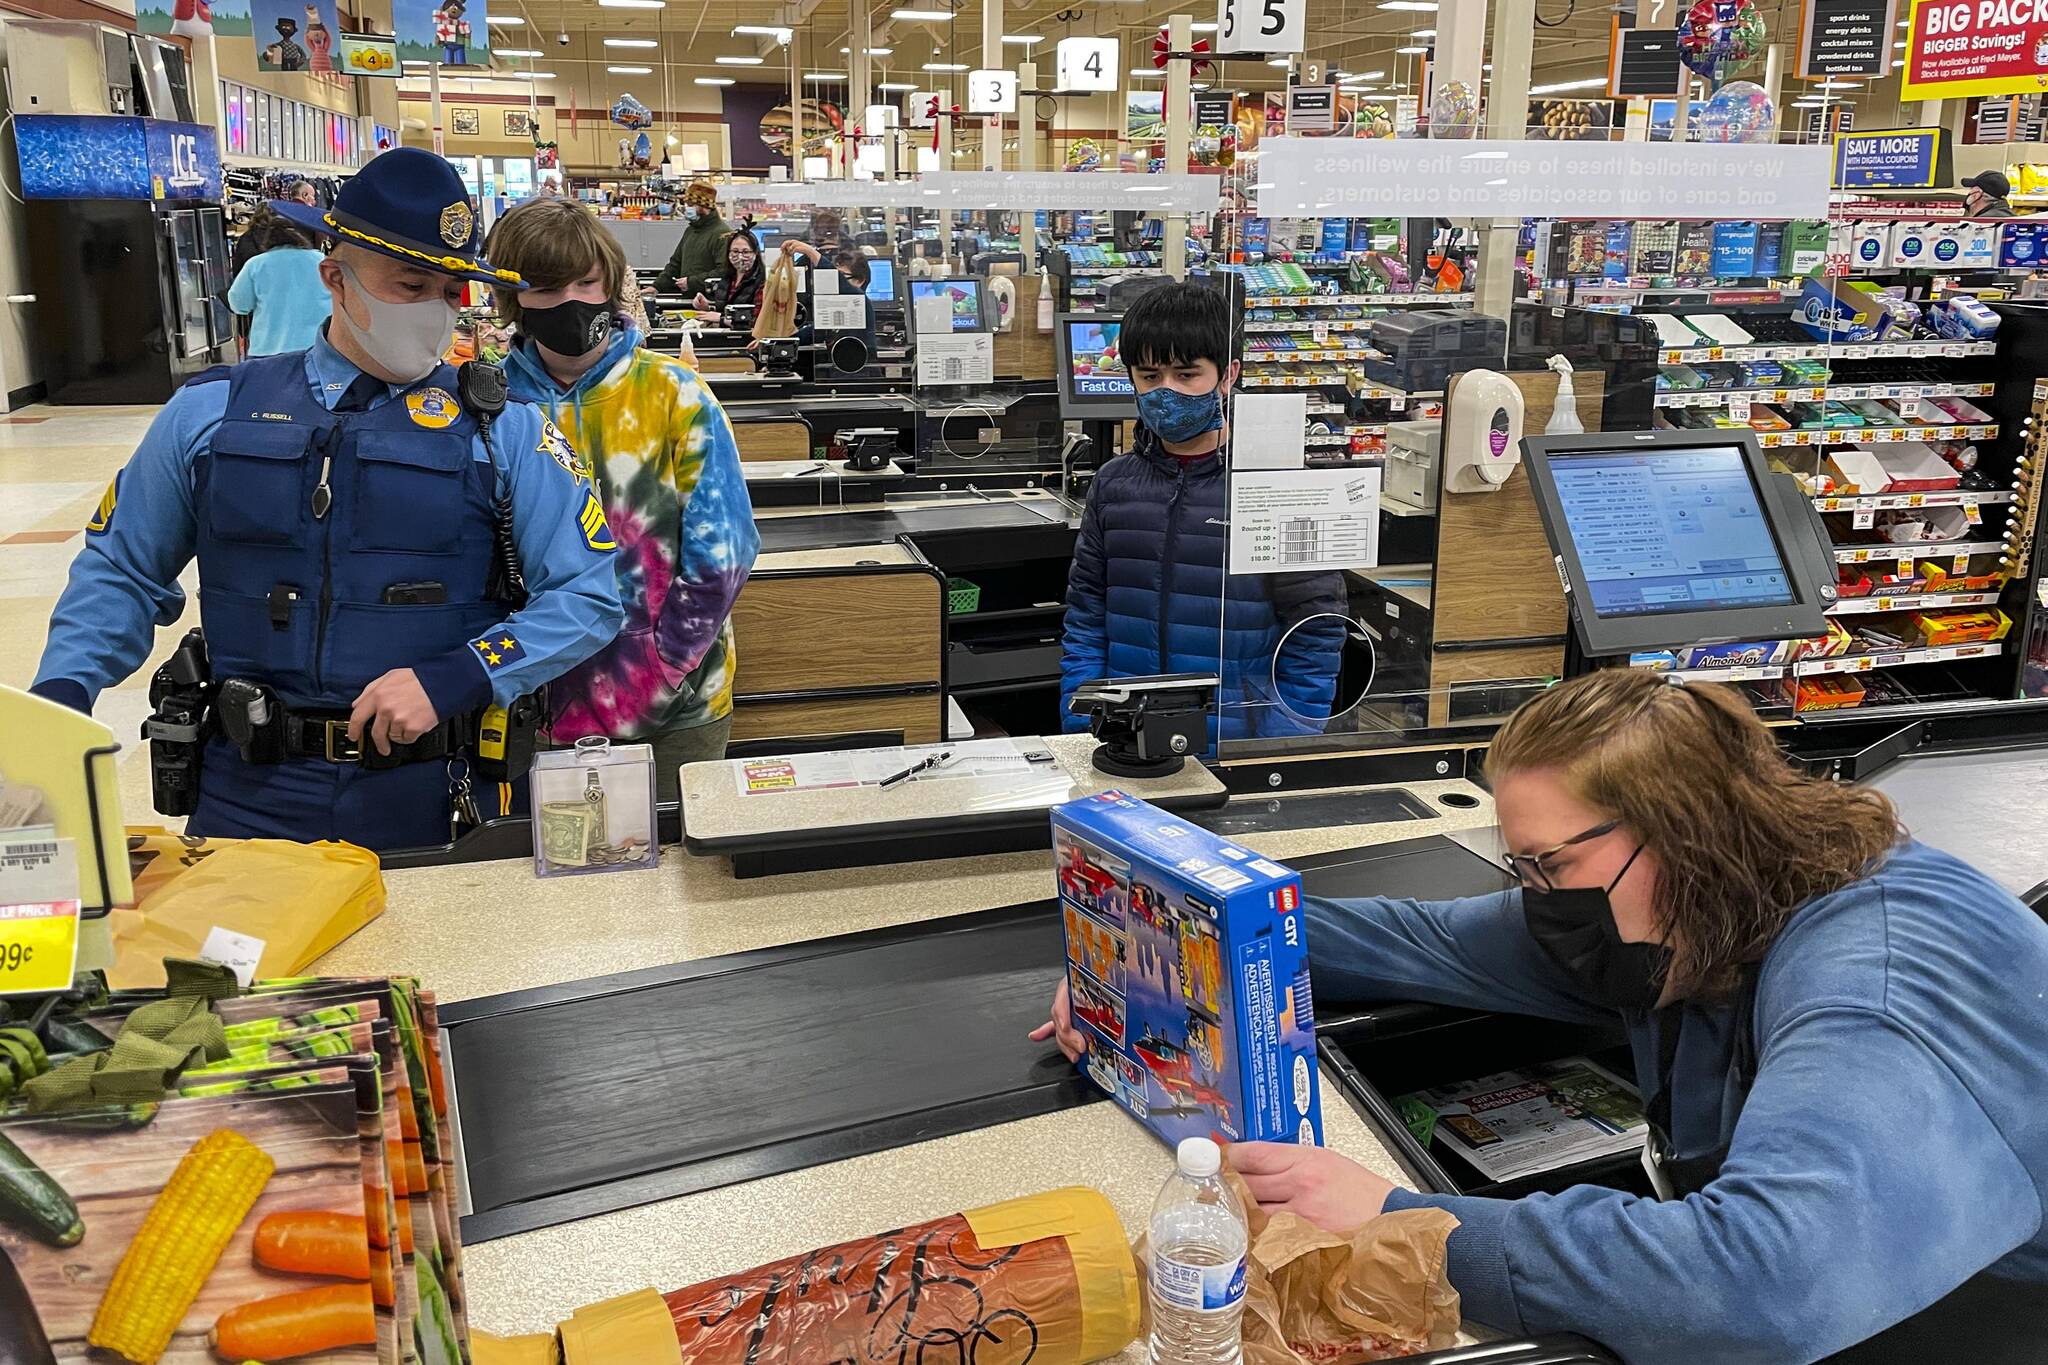 Alaska State Trooper Patrol Sergeant Chris Russell, Weldon and Keane look on as Fred Meyer employee Judy Magalotti checks them out during the annual Shop with a Cop event on Dec. 18, 2021. (Michael S. Lockett / Juneau Empire)